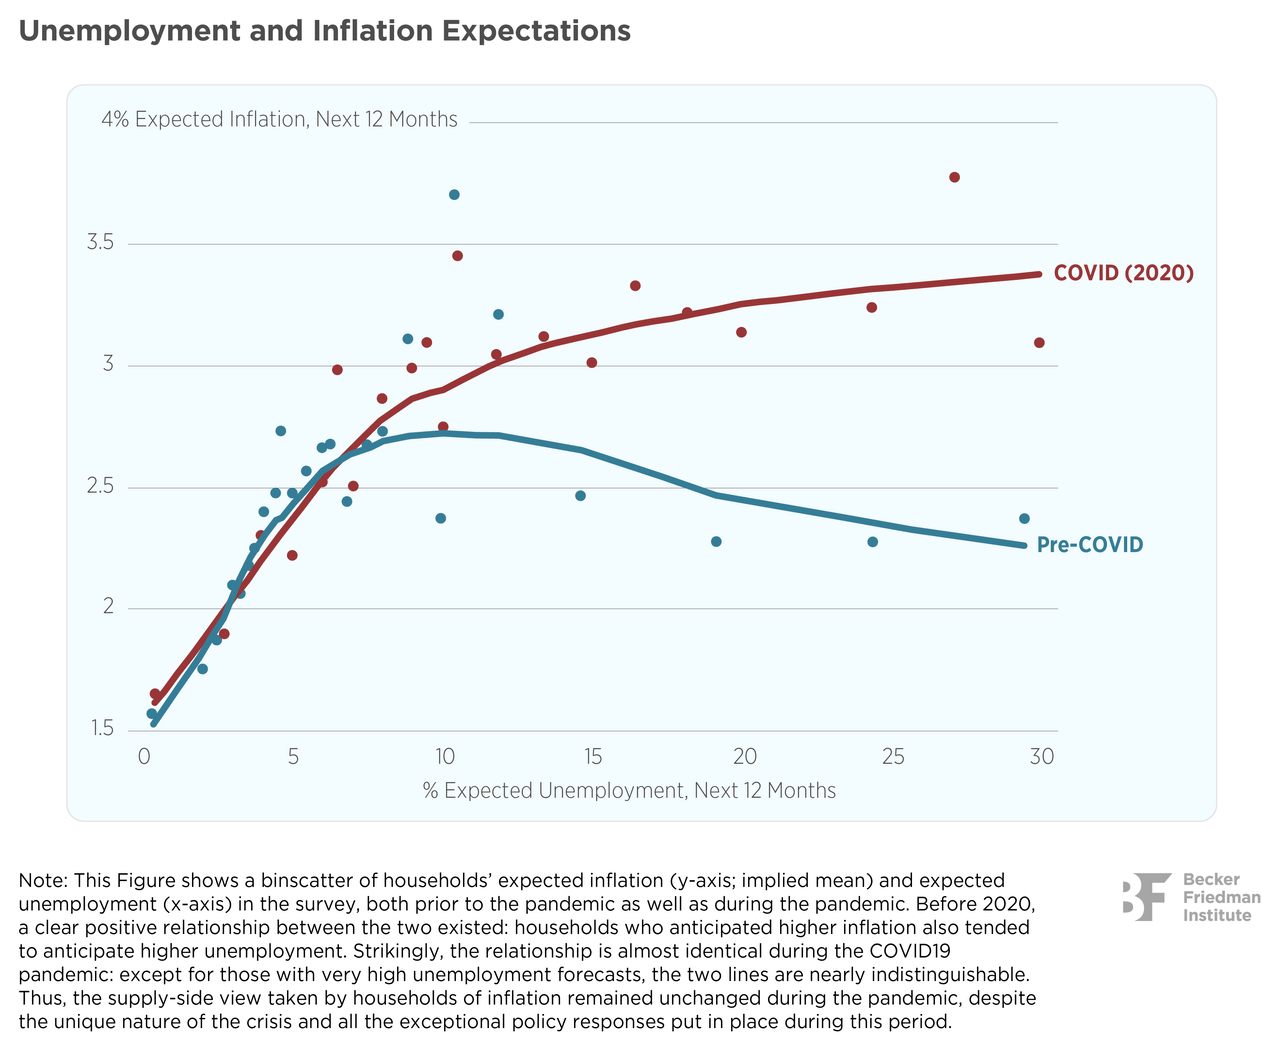 Unemployment & Inflation Expectation pre and post pandemic